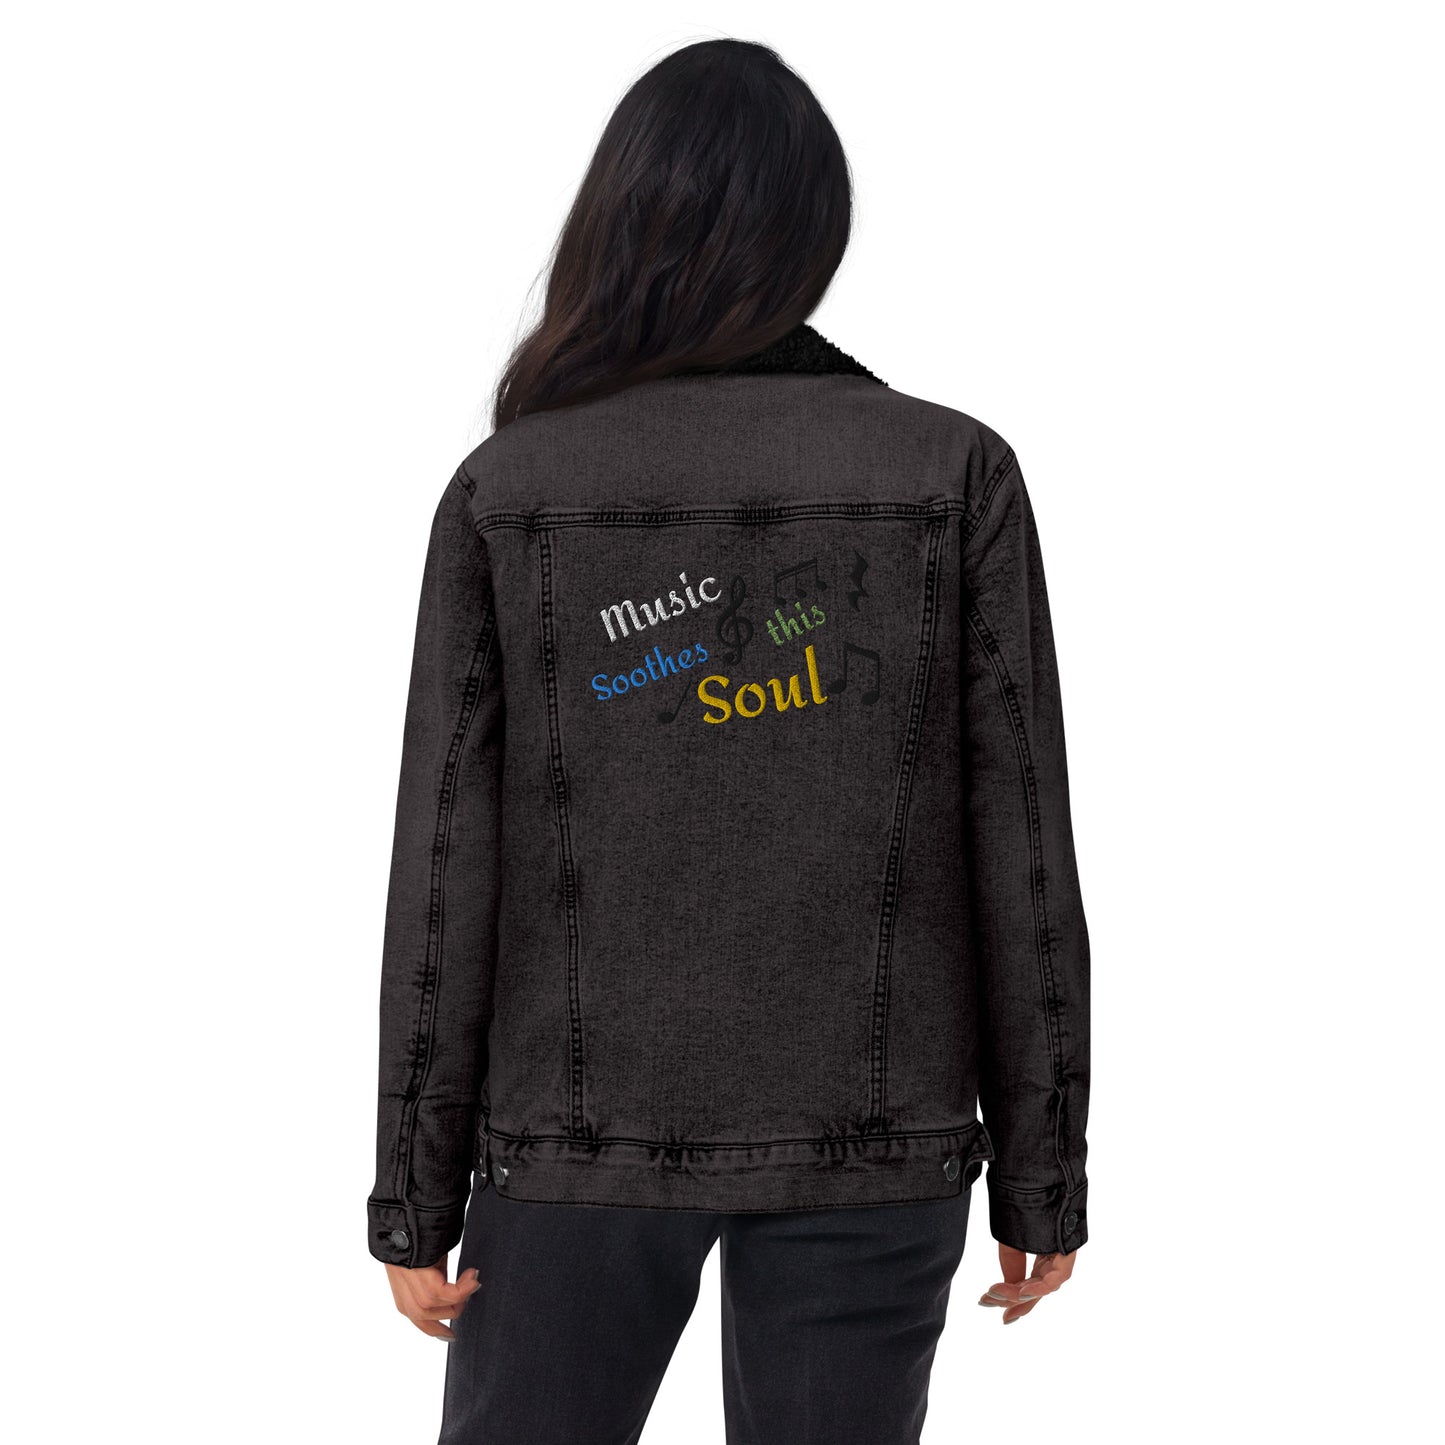 Music soothes this Soul denim sherpa jacket